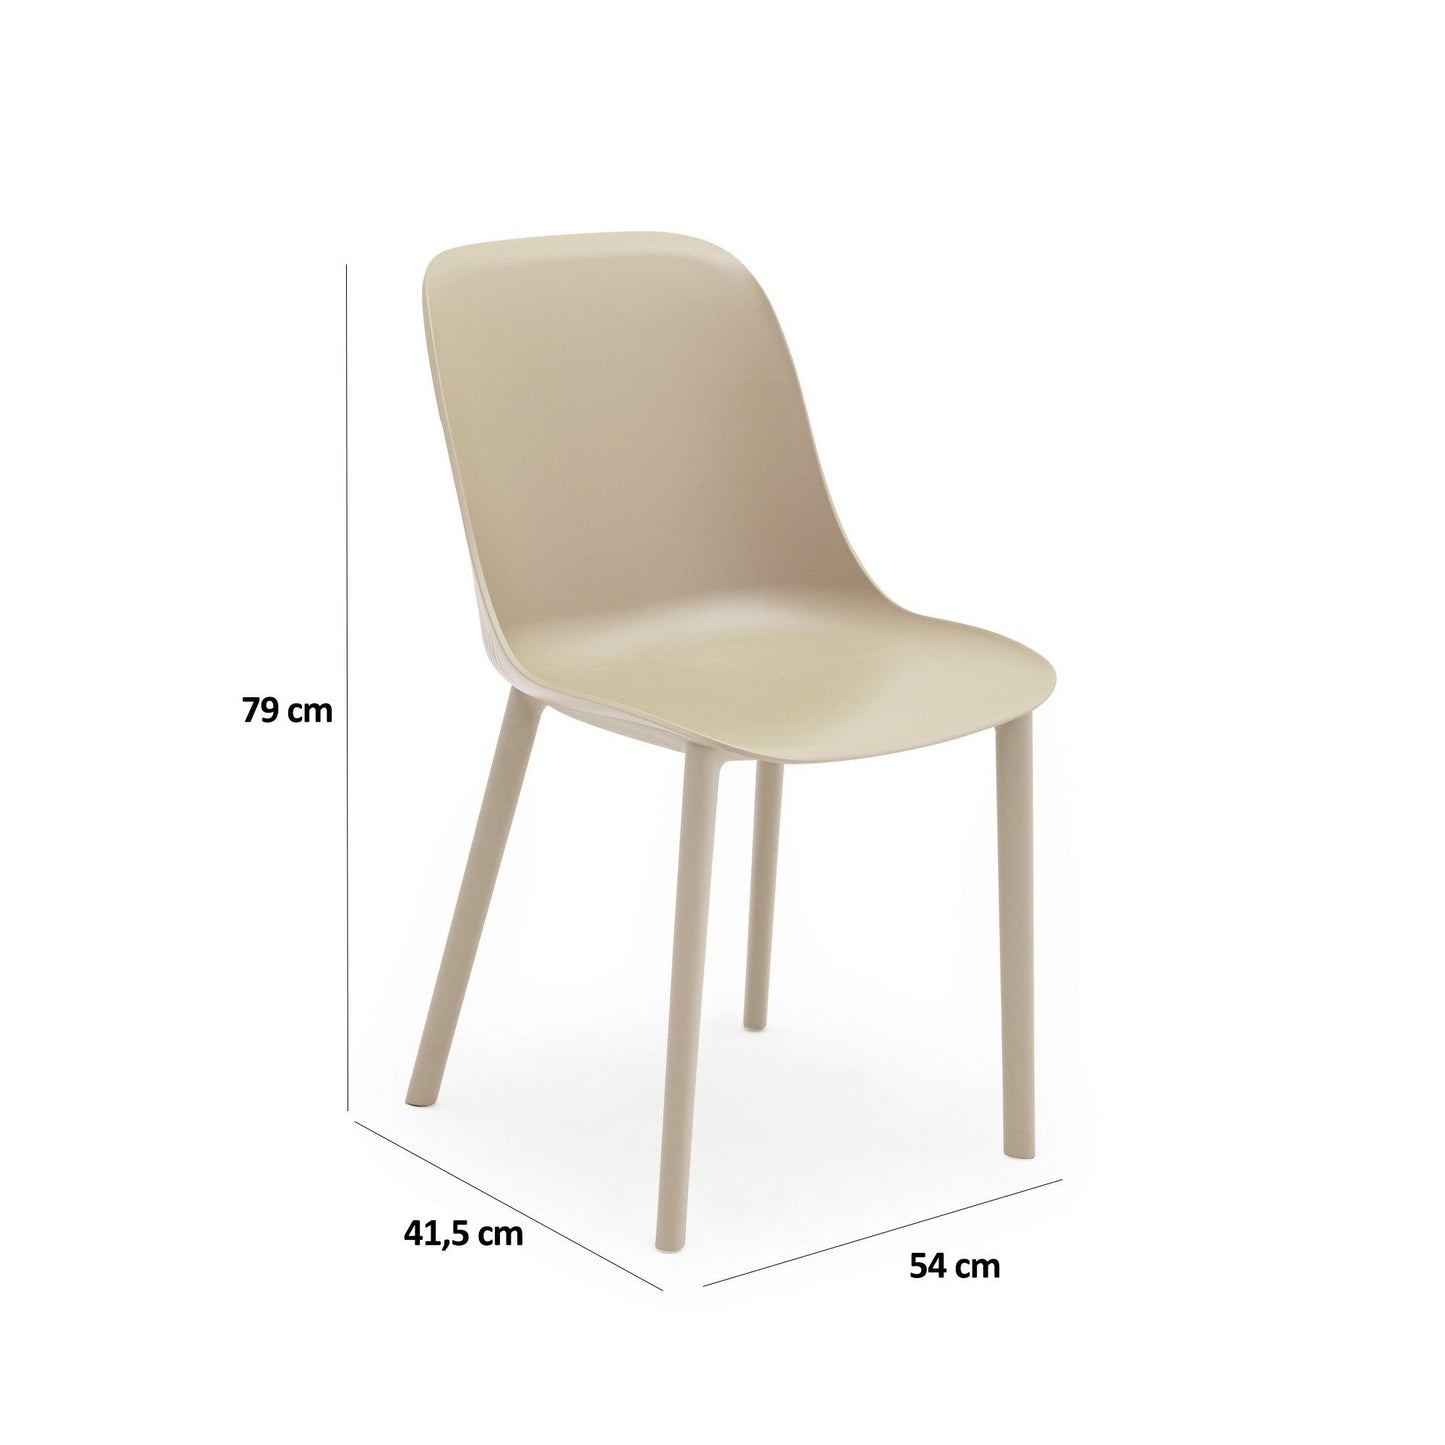 Shell-P - Beige - Chair Set (2 Pieces)